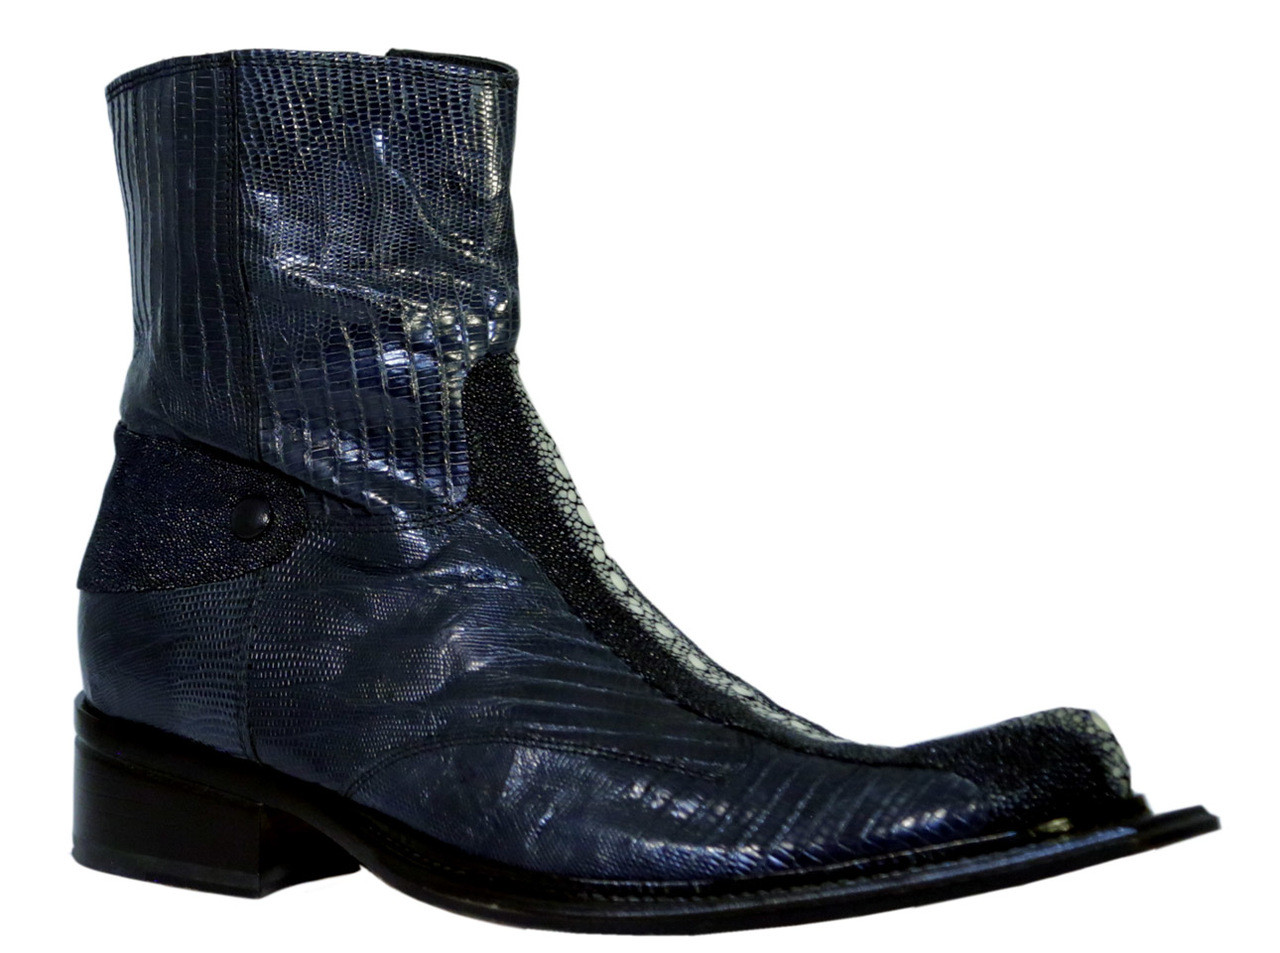 Mauri 42729 Ankle Boots Stingray/Lizard Black and Navy